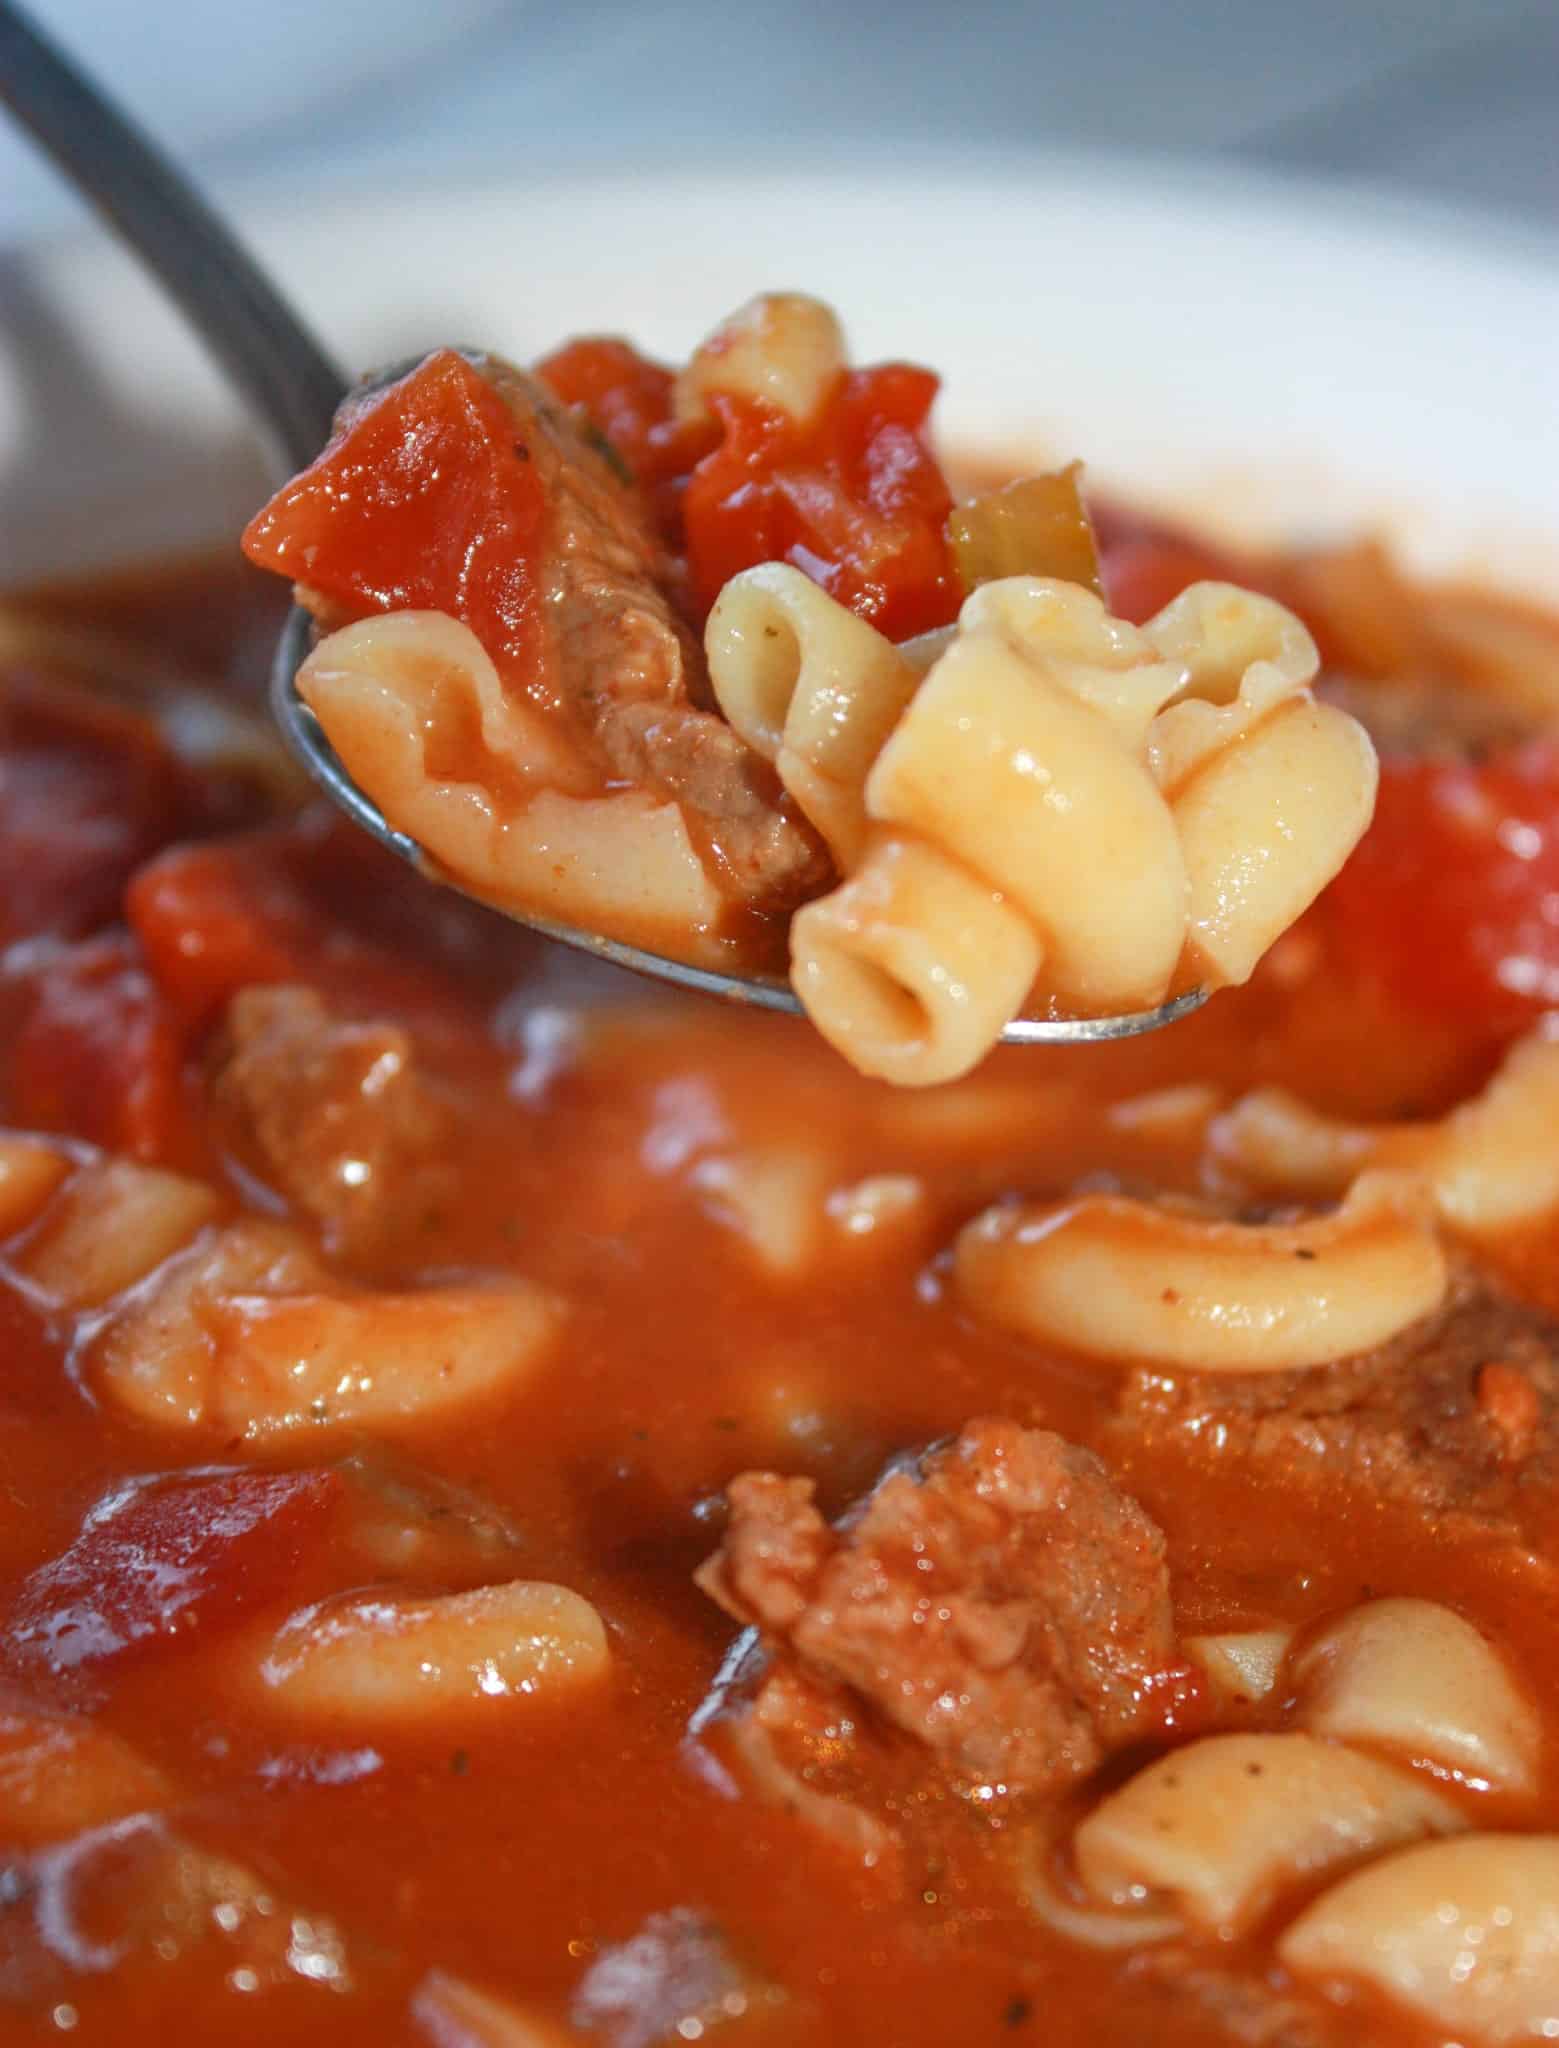 If you are looking for a hearty comfort food recipe then you will enjoy Instant Pot Tomato Beef Soup with Pasta.  This gluten free soup will warm your belly and satisfy your appetite!